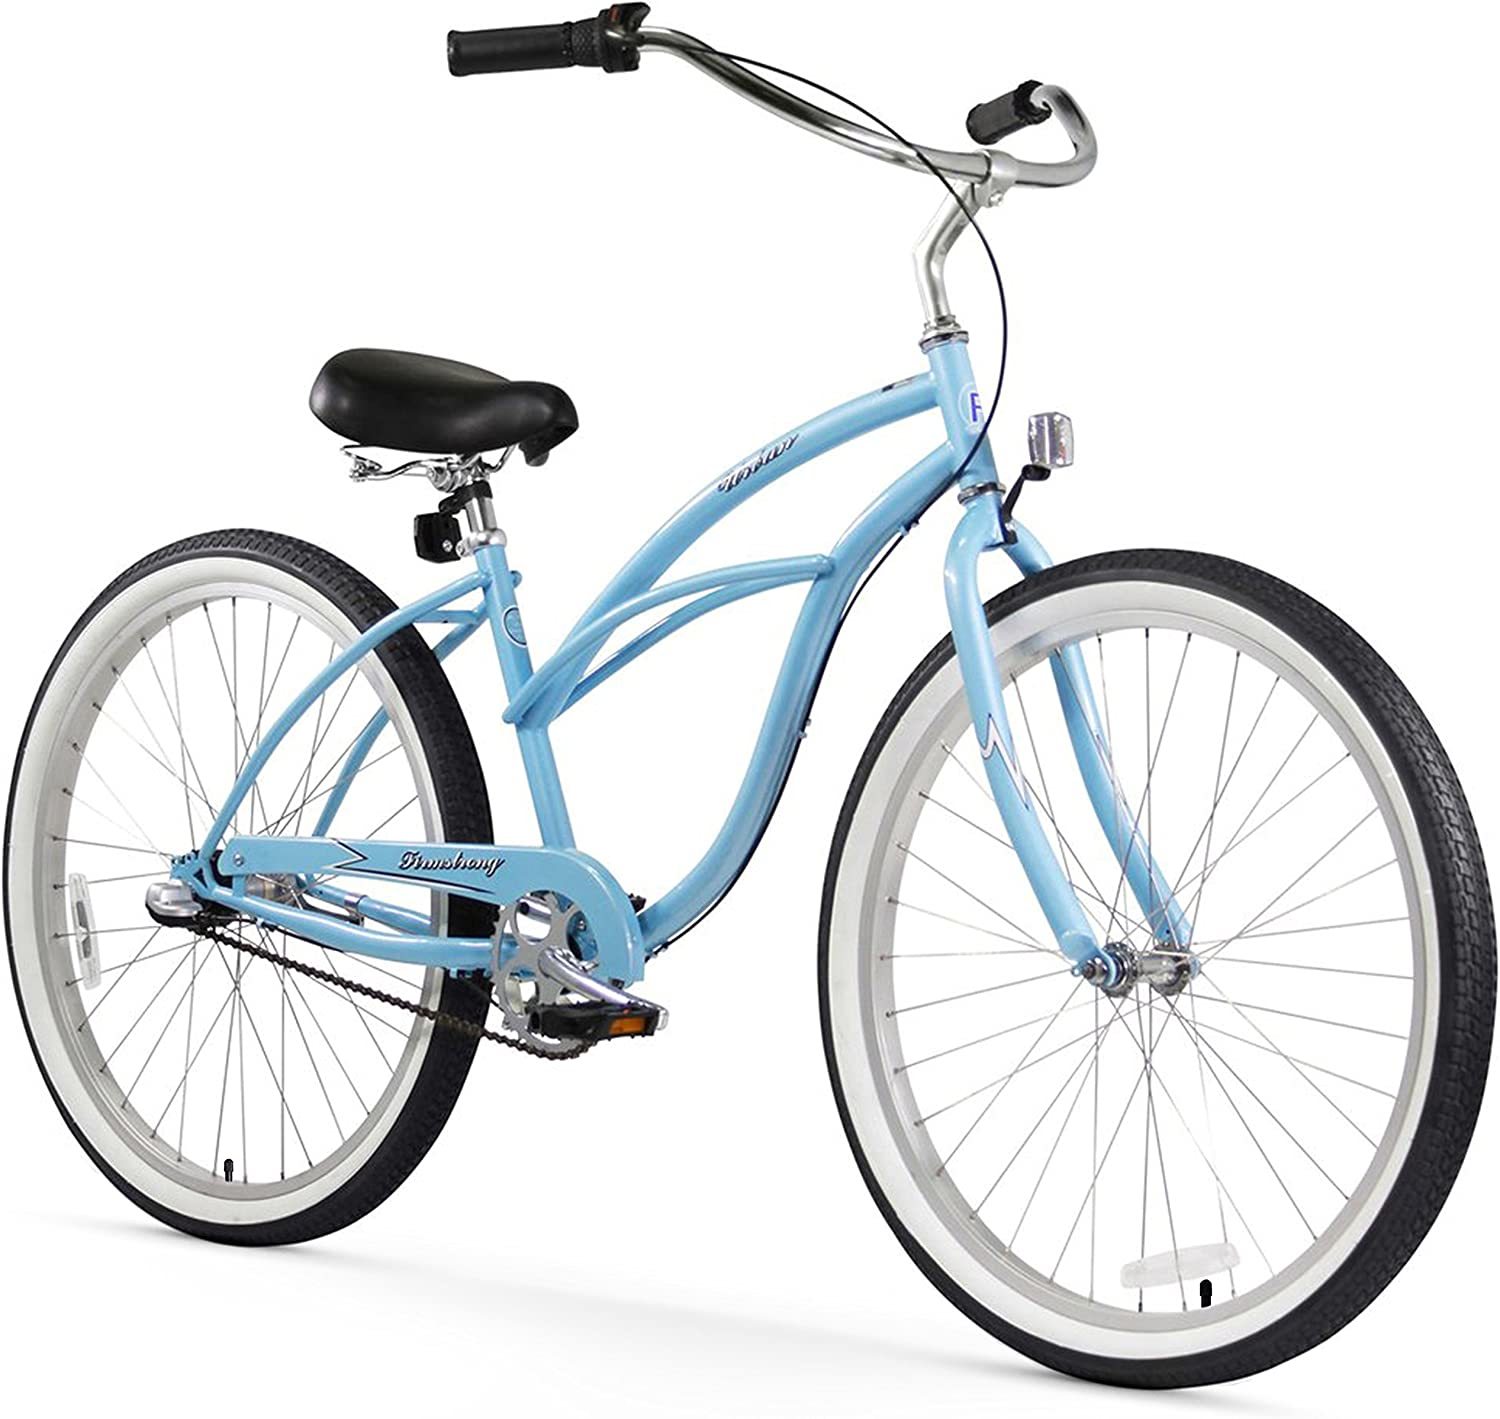 Primary image for Firmstrong Urban Lady 3-Speed Beach Cruiser Bicycle, Baby Blue, 15.5, 15232